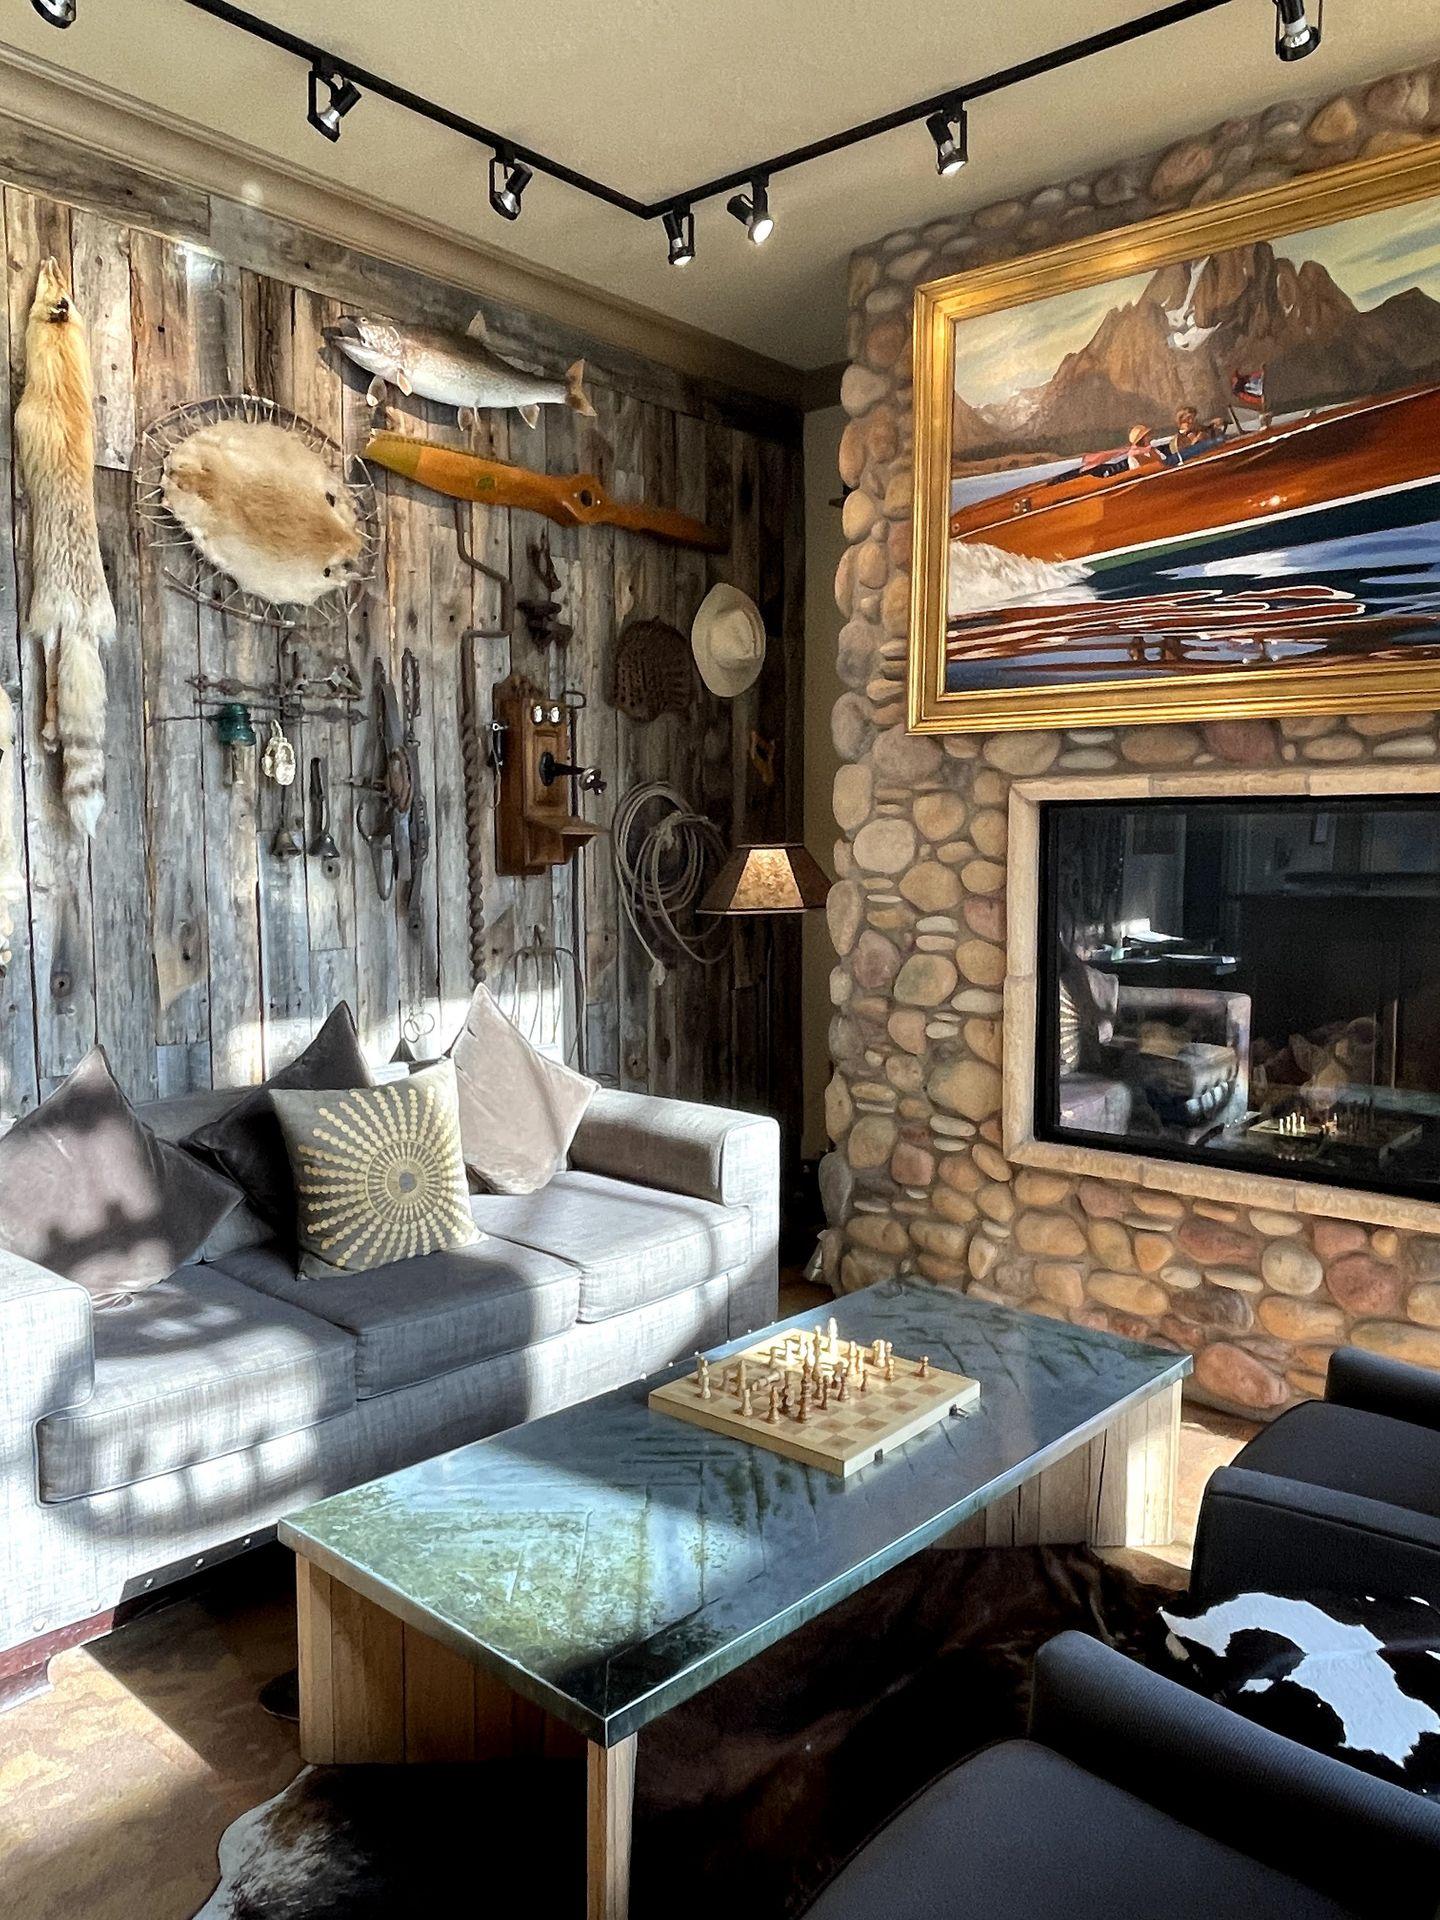 A corner of the lobby in Lexington Jackson Hole. There is a couch with throw pillows, a table with a chess set and a rustic wall with a fish, a hat, an animal skin and various outdoorsy decor.